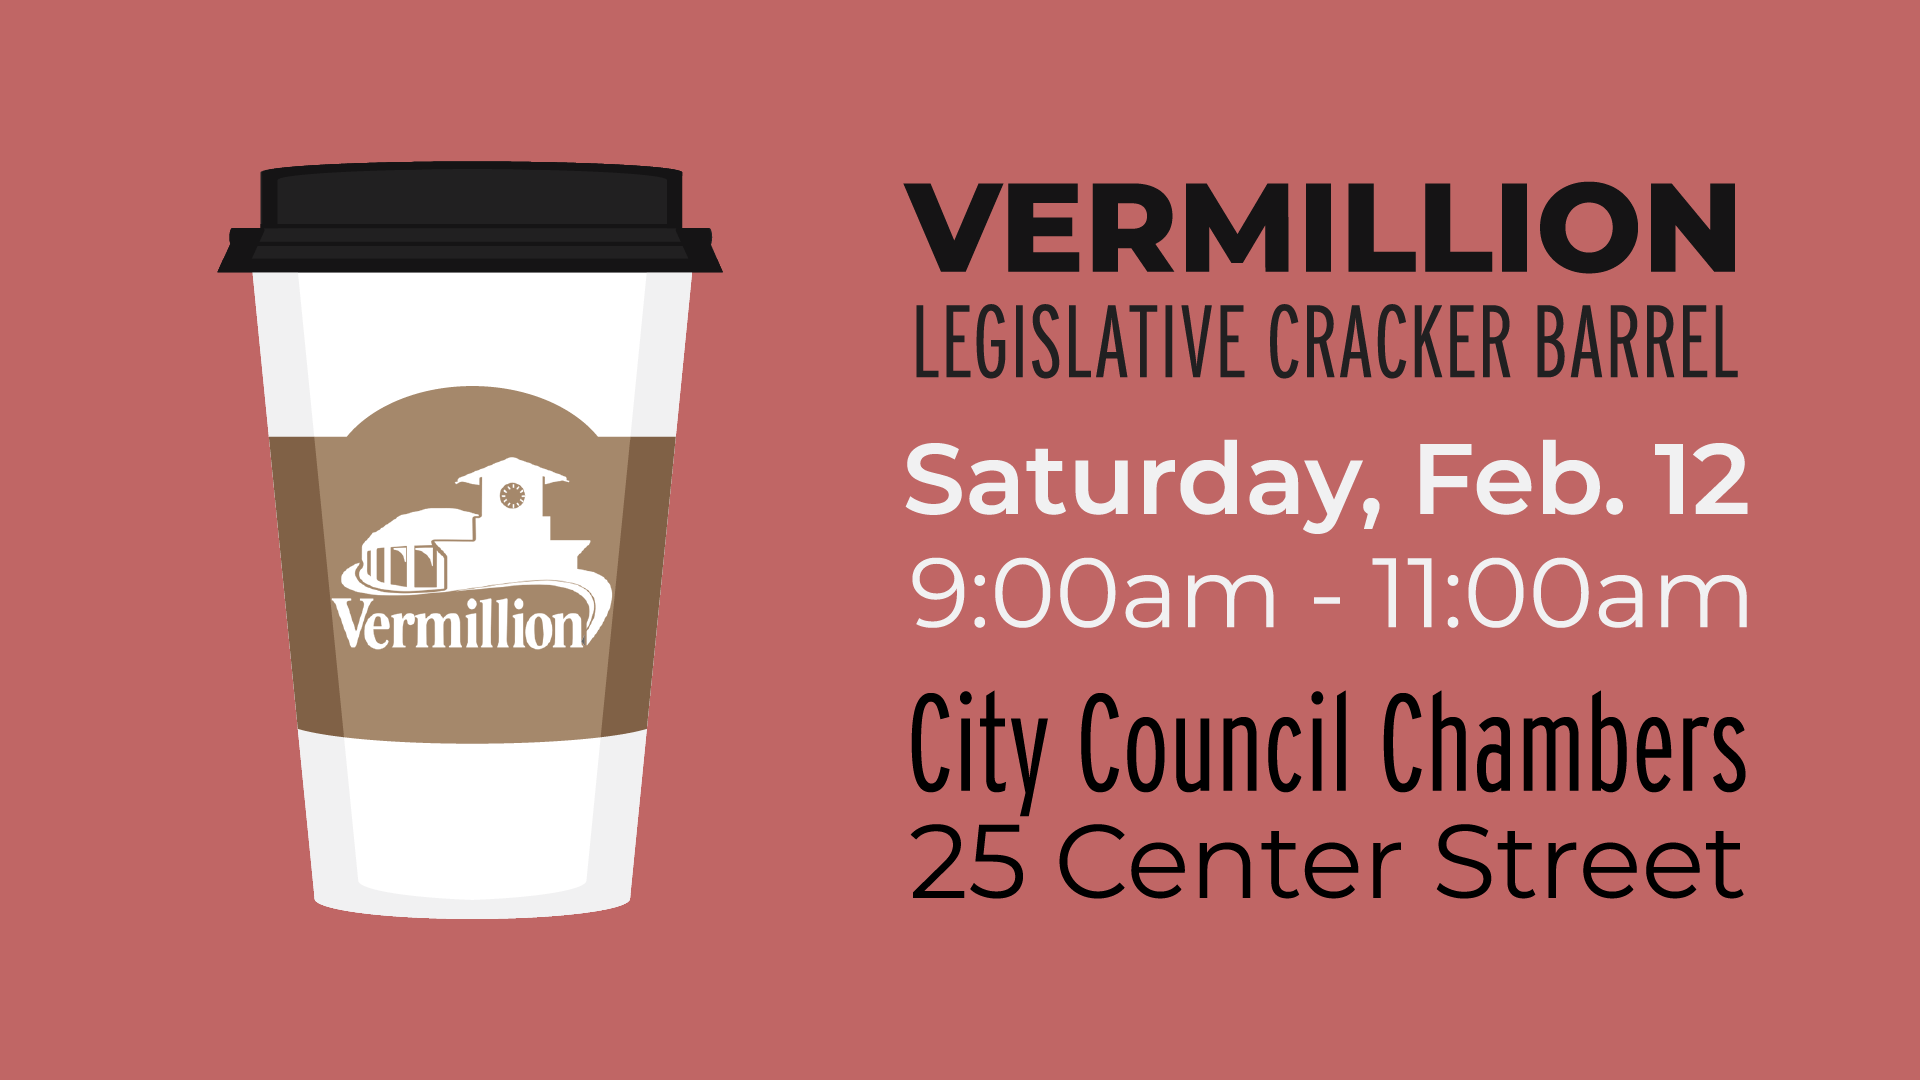 to-go coffee cup on a red background with sleeve featuring vermillion chamber & development company logo beside text details of feb 12 legislative cracker barrel